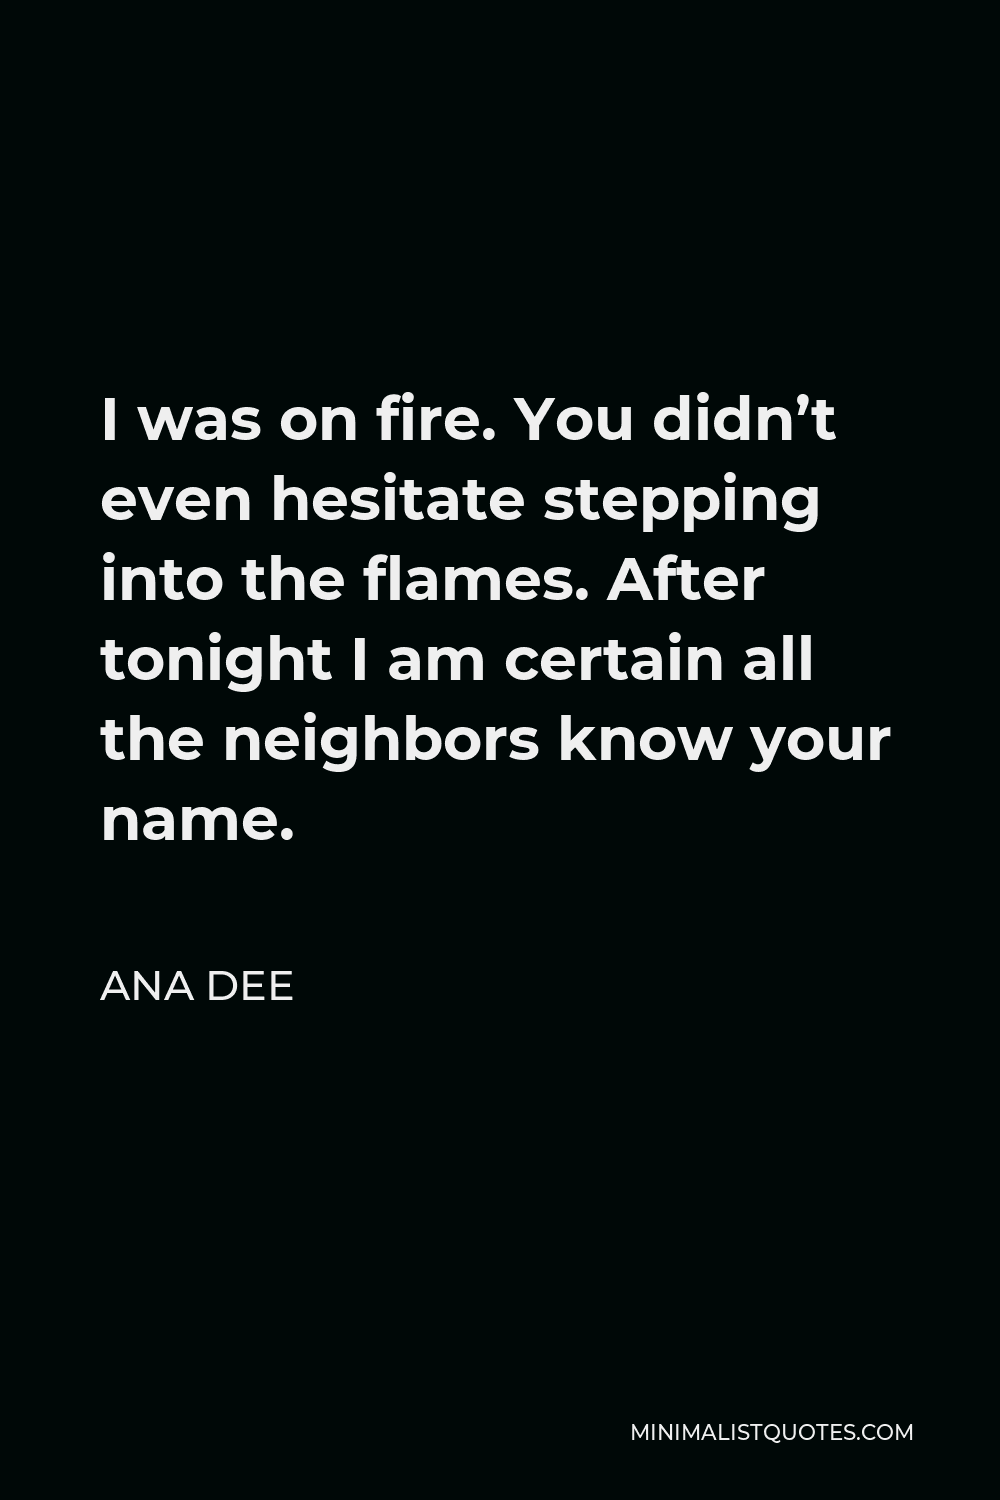 Ana Dee Quote - I was on fire. You didn’t even hesitate stepping into the flames. After tonight I am certain all the neighbors know your name.